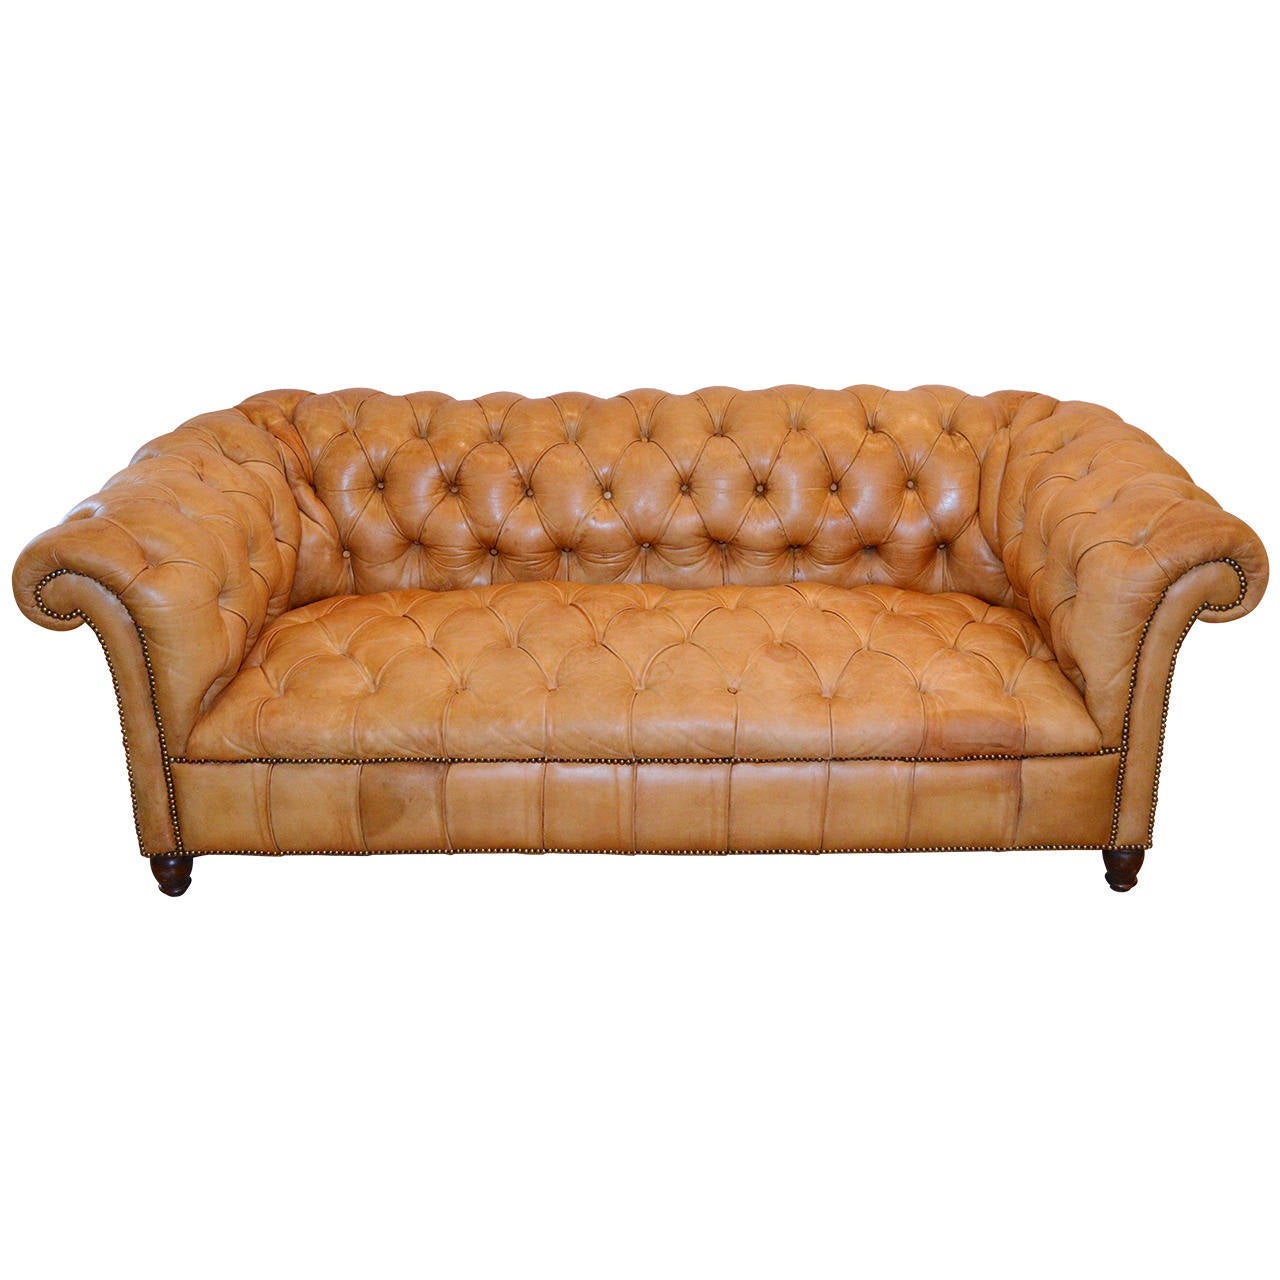 English Chesterfield Leather Sofa Circa 1920s At 1stdibs